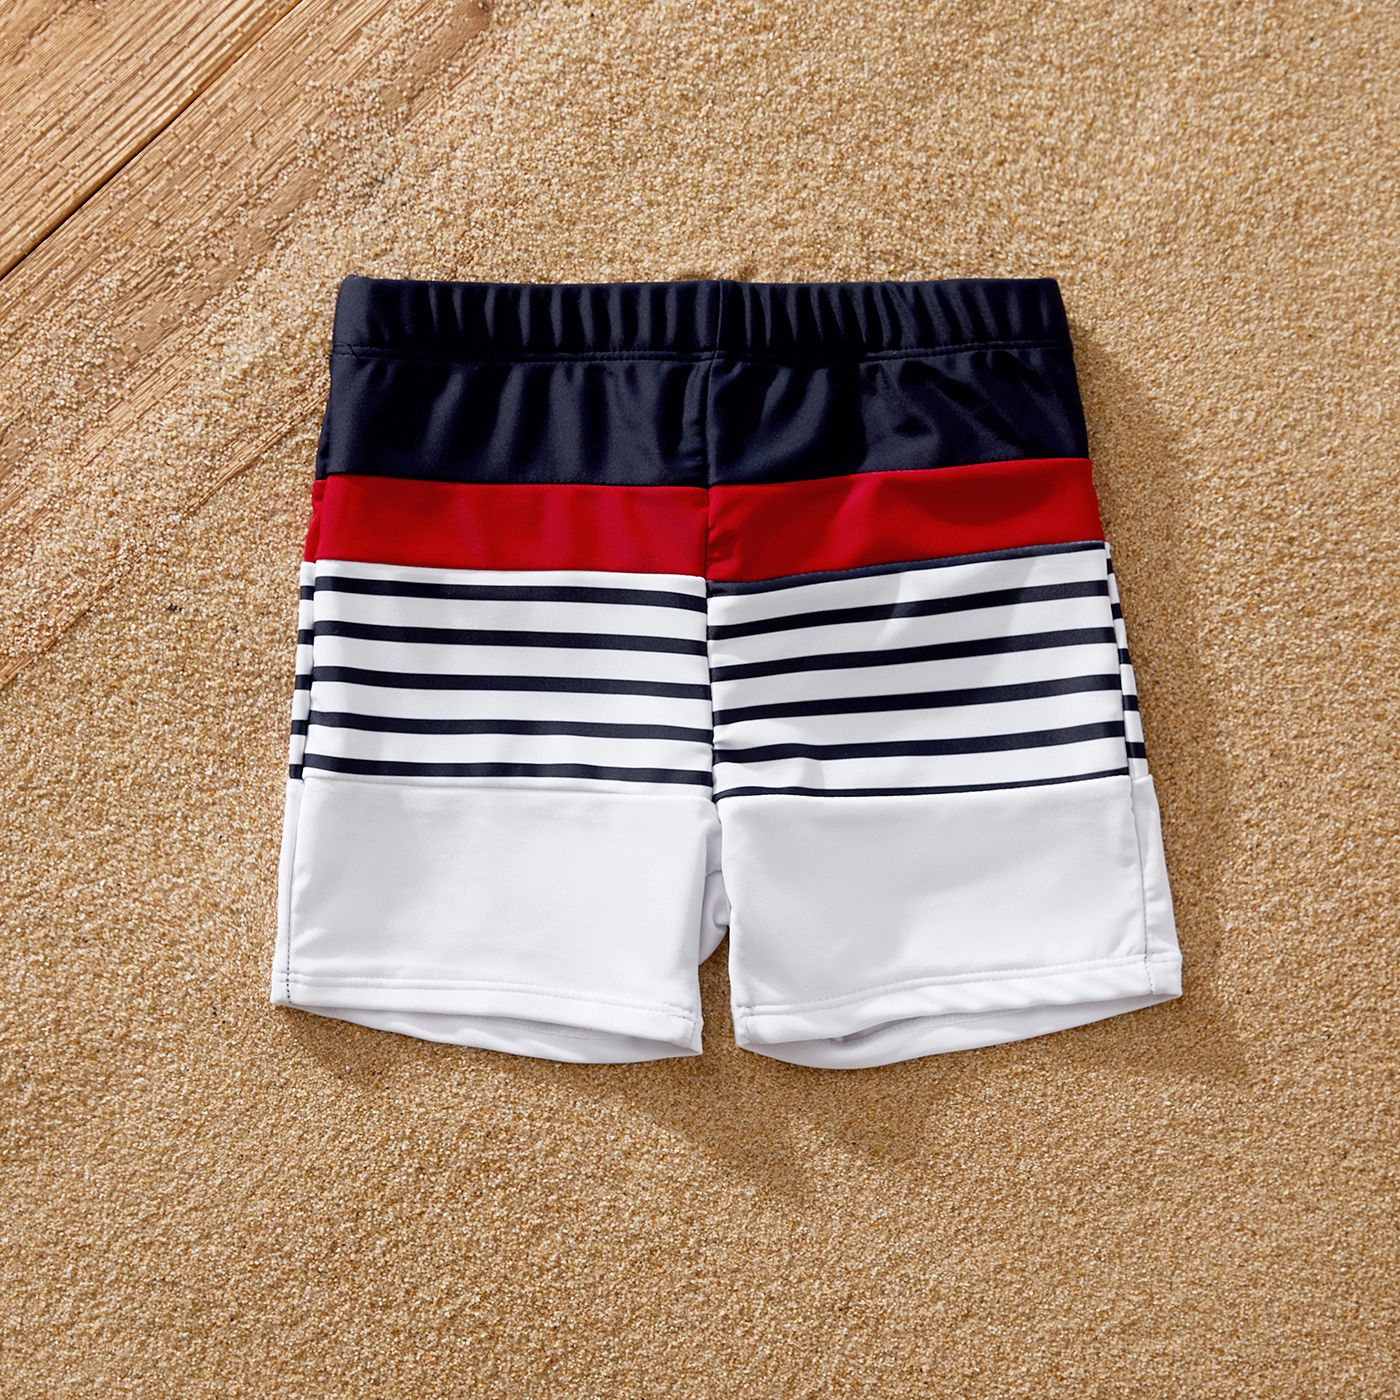 Family Matching Striped Print One-piece Swimsuit or Swim Trunks Shorts